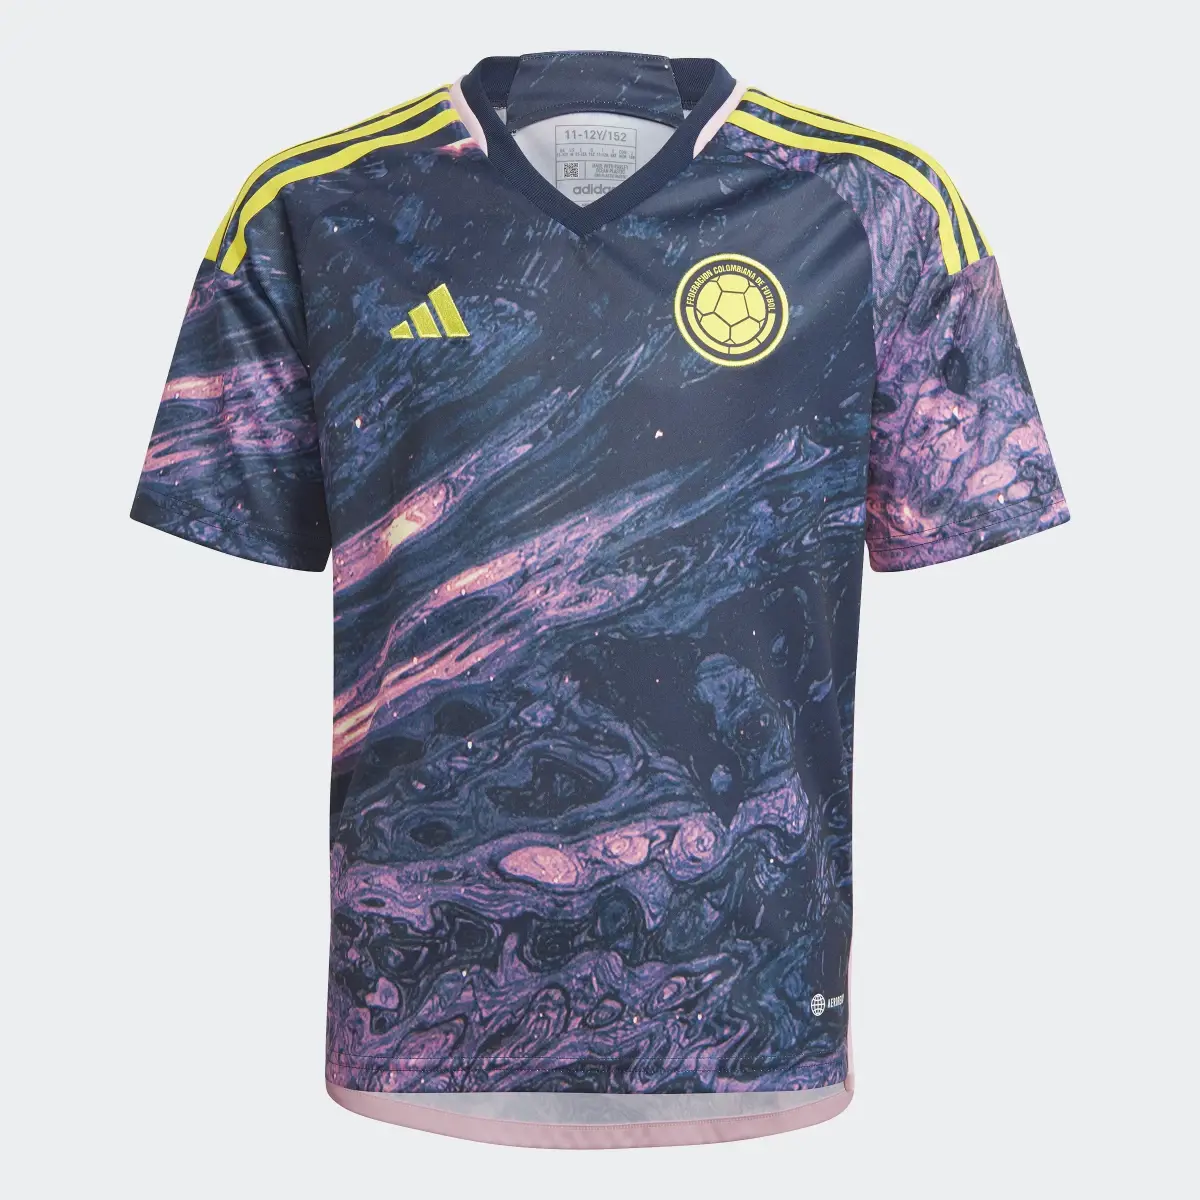 Adidas Colombia Women's Team 23 Away Jersey. 1